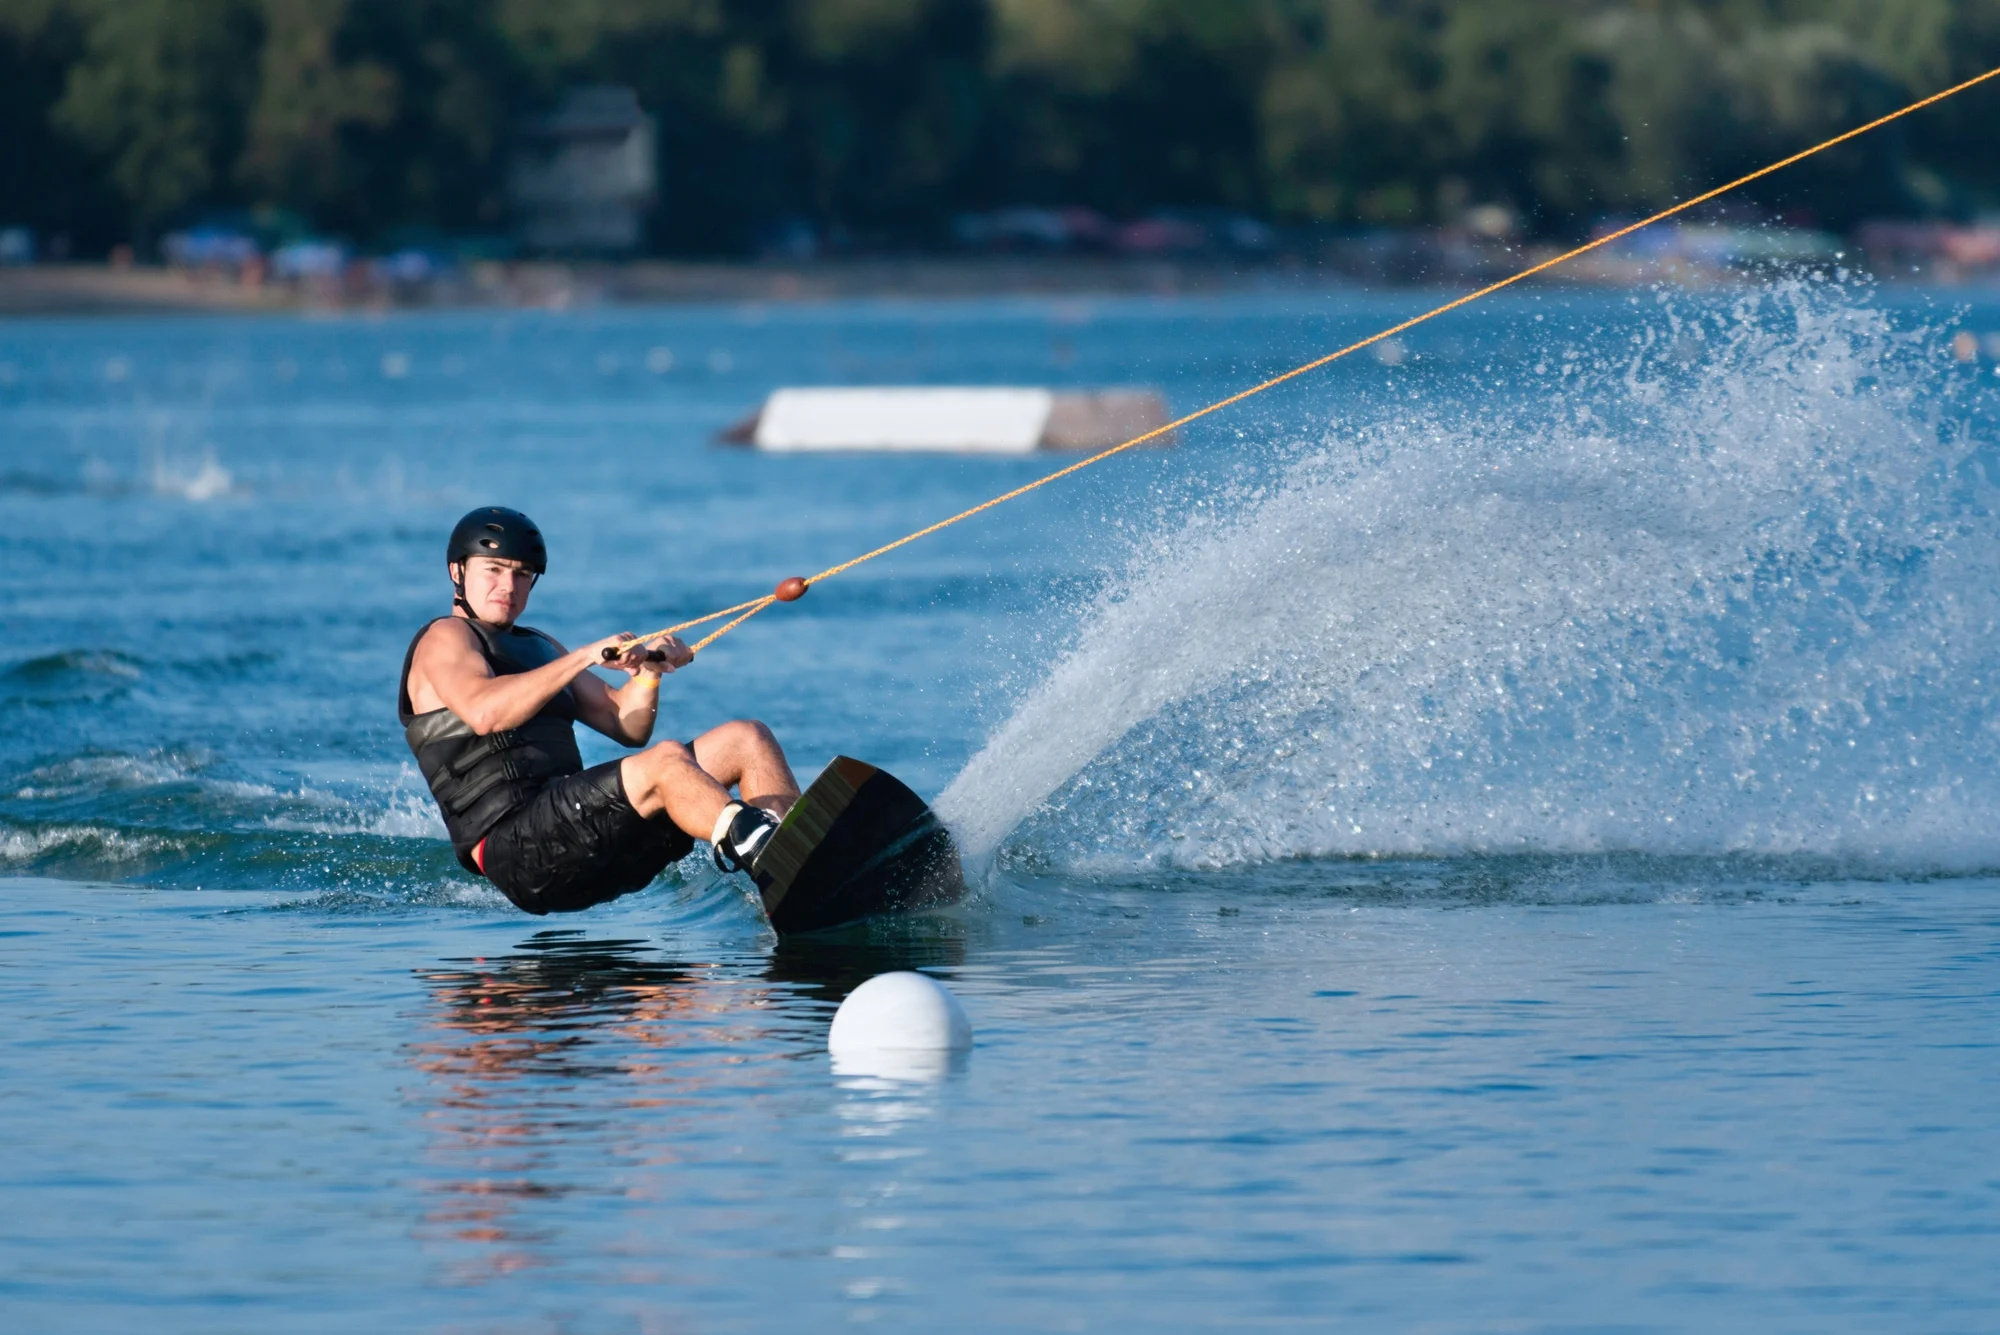 Wakeboarding: Riding a wakeboard is somehow similar to kitesurfing, Extreme water sports, Recreational sports. 2000x1340 HD Wallpaper.